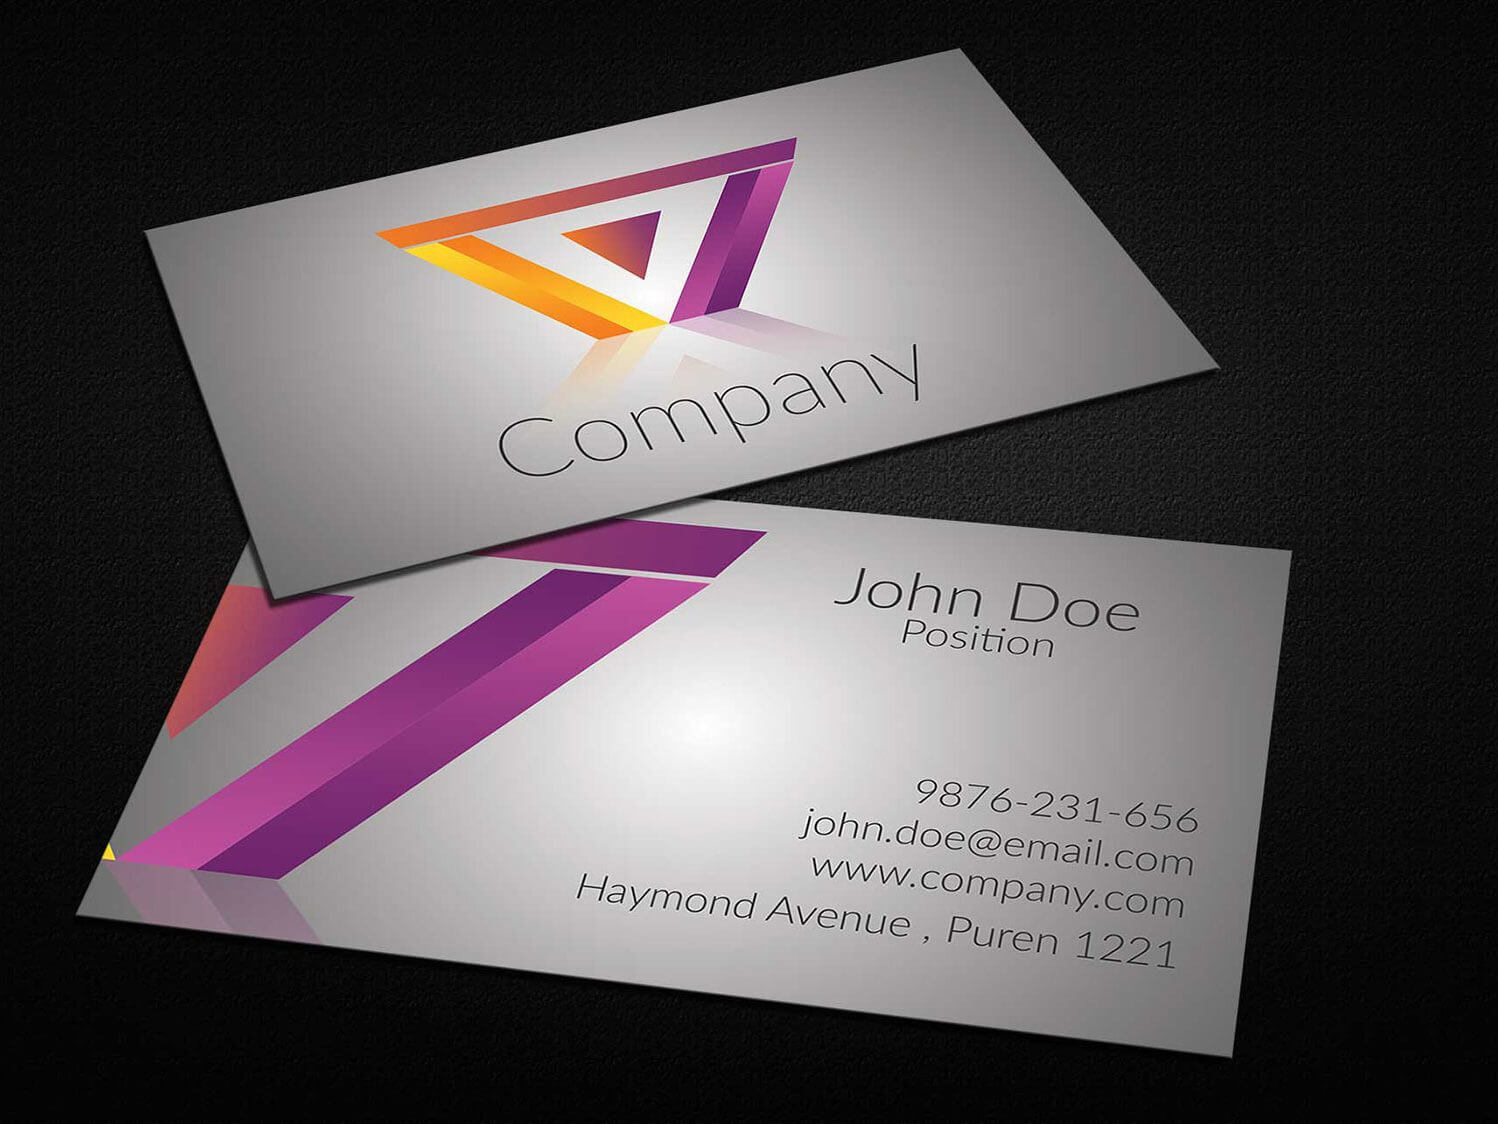 006 Building And Construction Business Card Template In Construction Business Card Templates Download Free